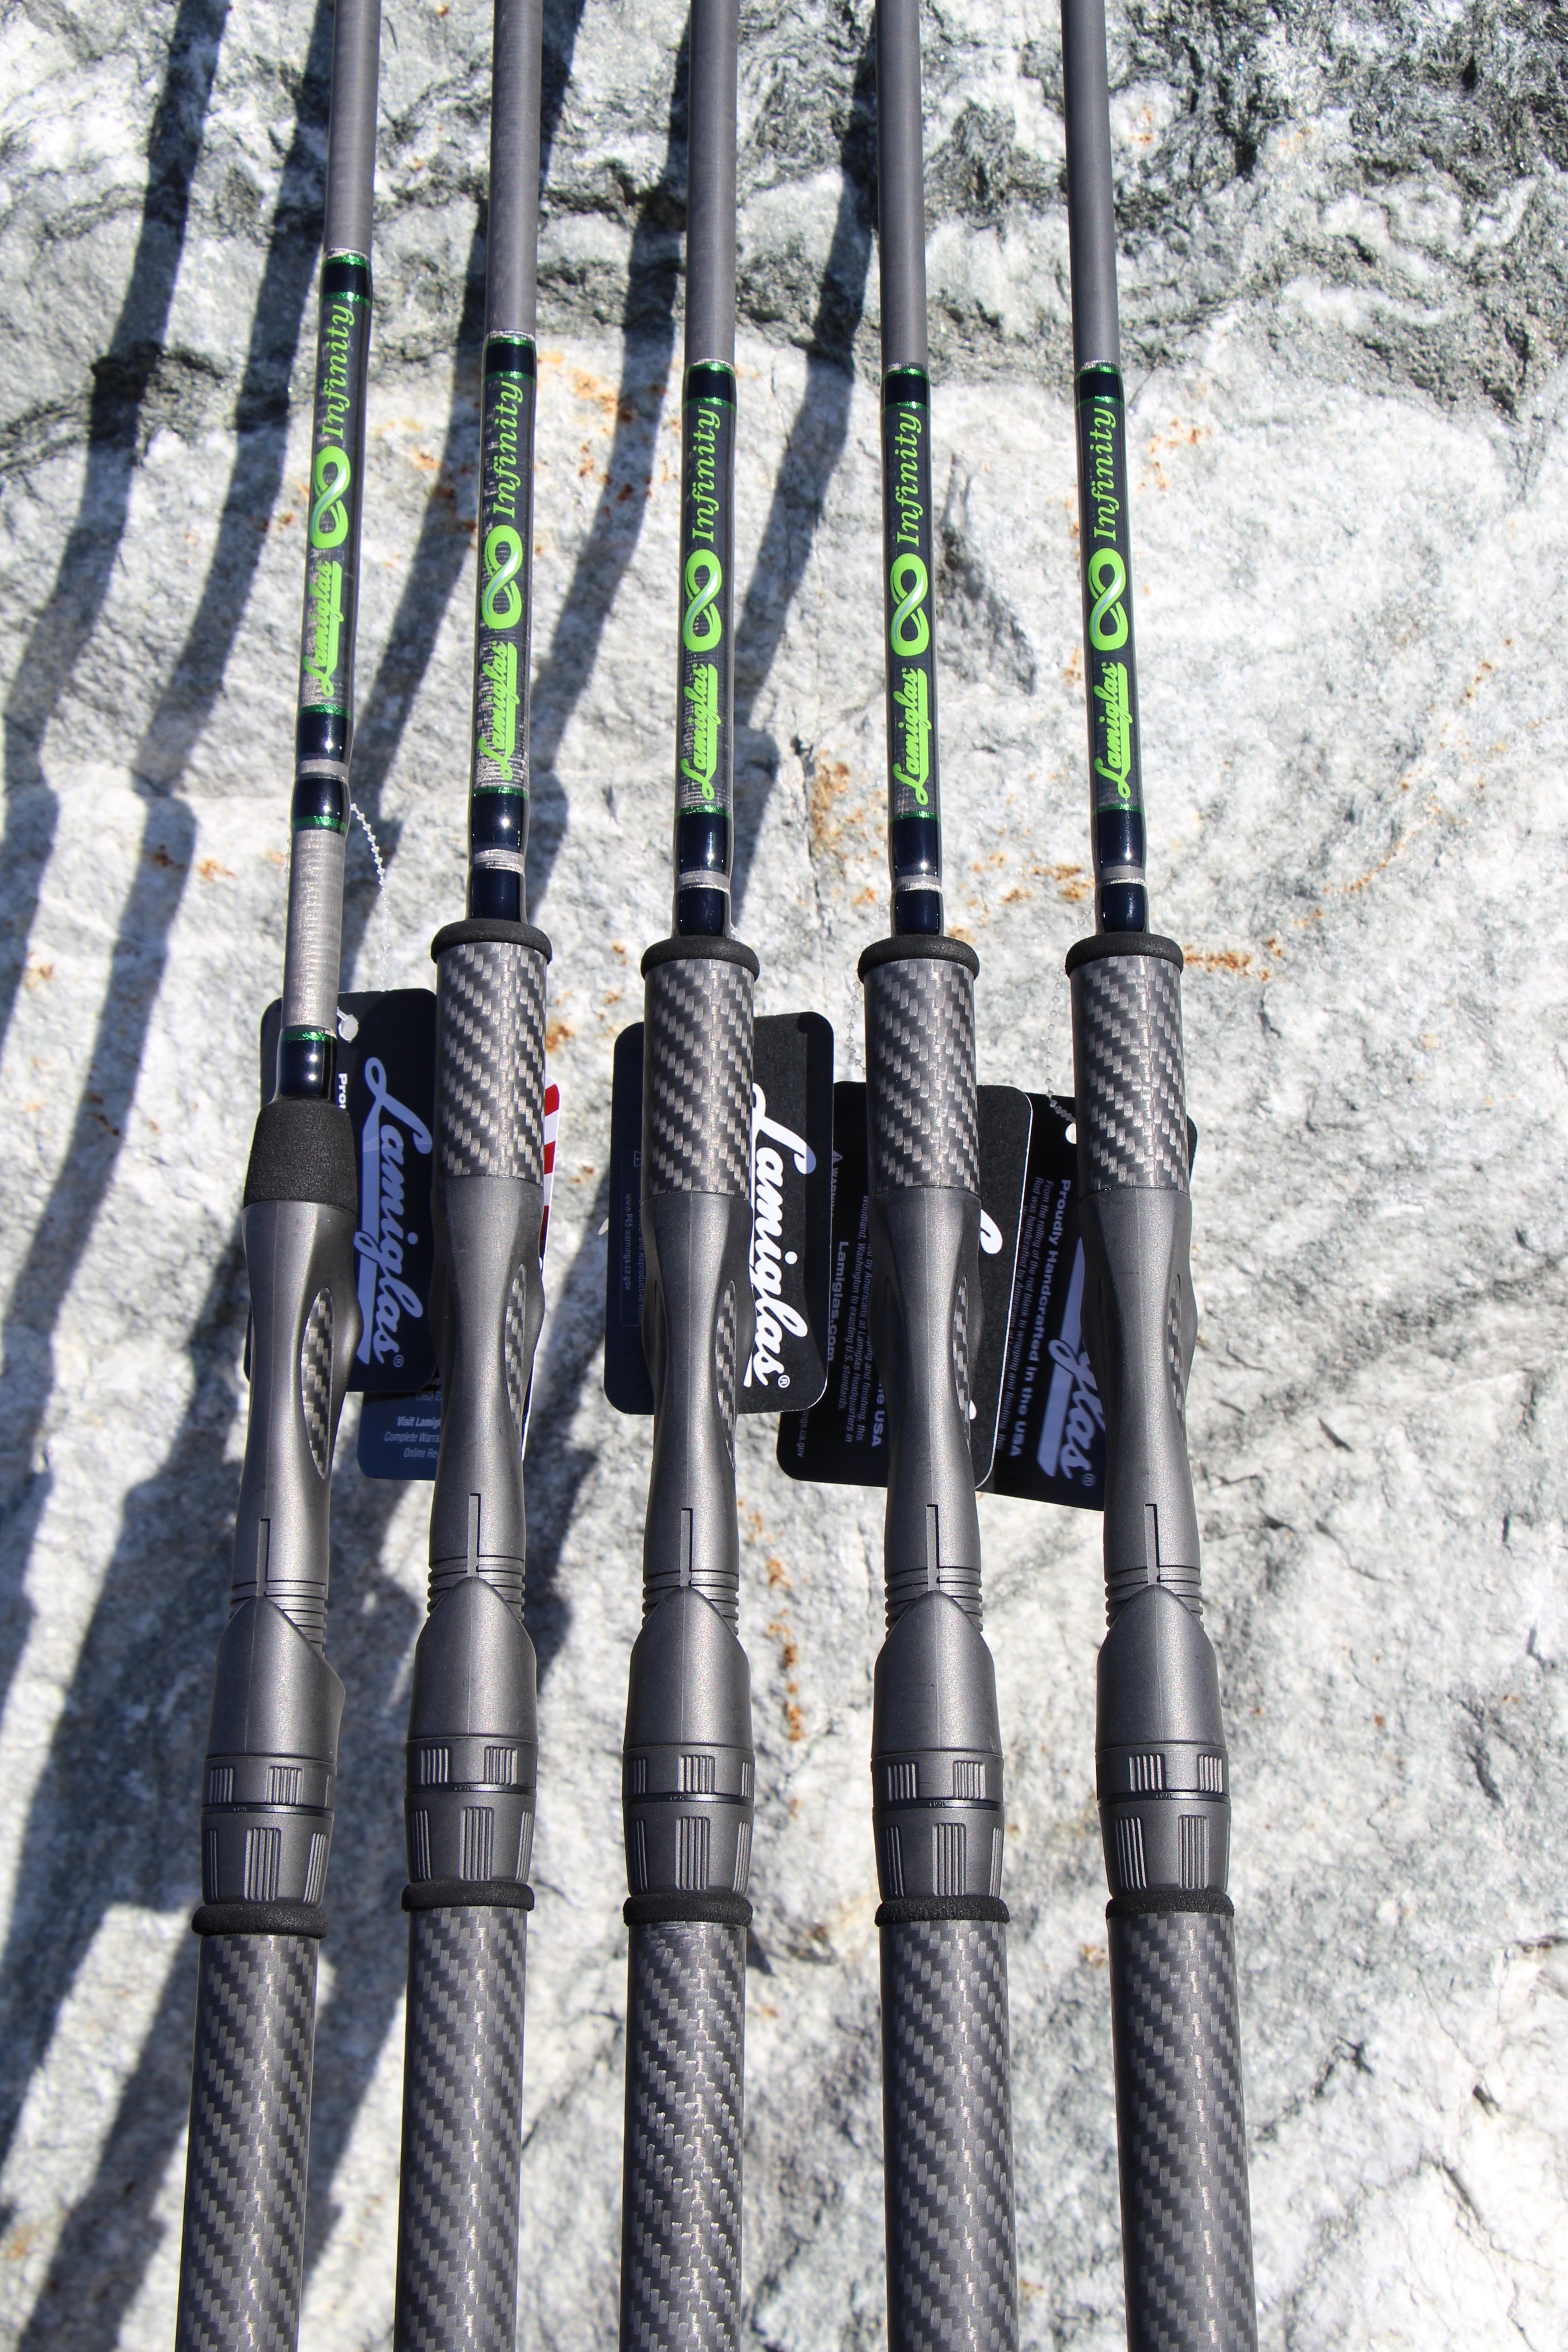 Lamiglas 10' 6 Float Rod - PLUS a FREE 2-year subscription to GLA – Great  Lakes Angler